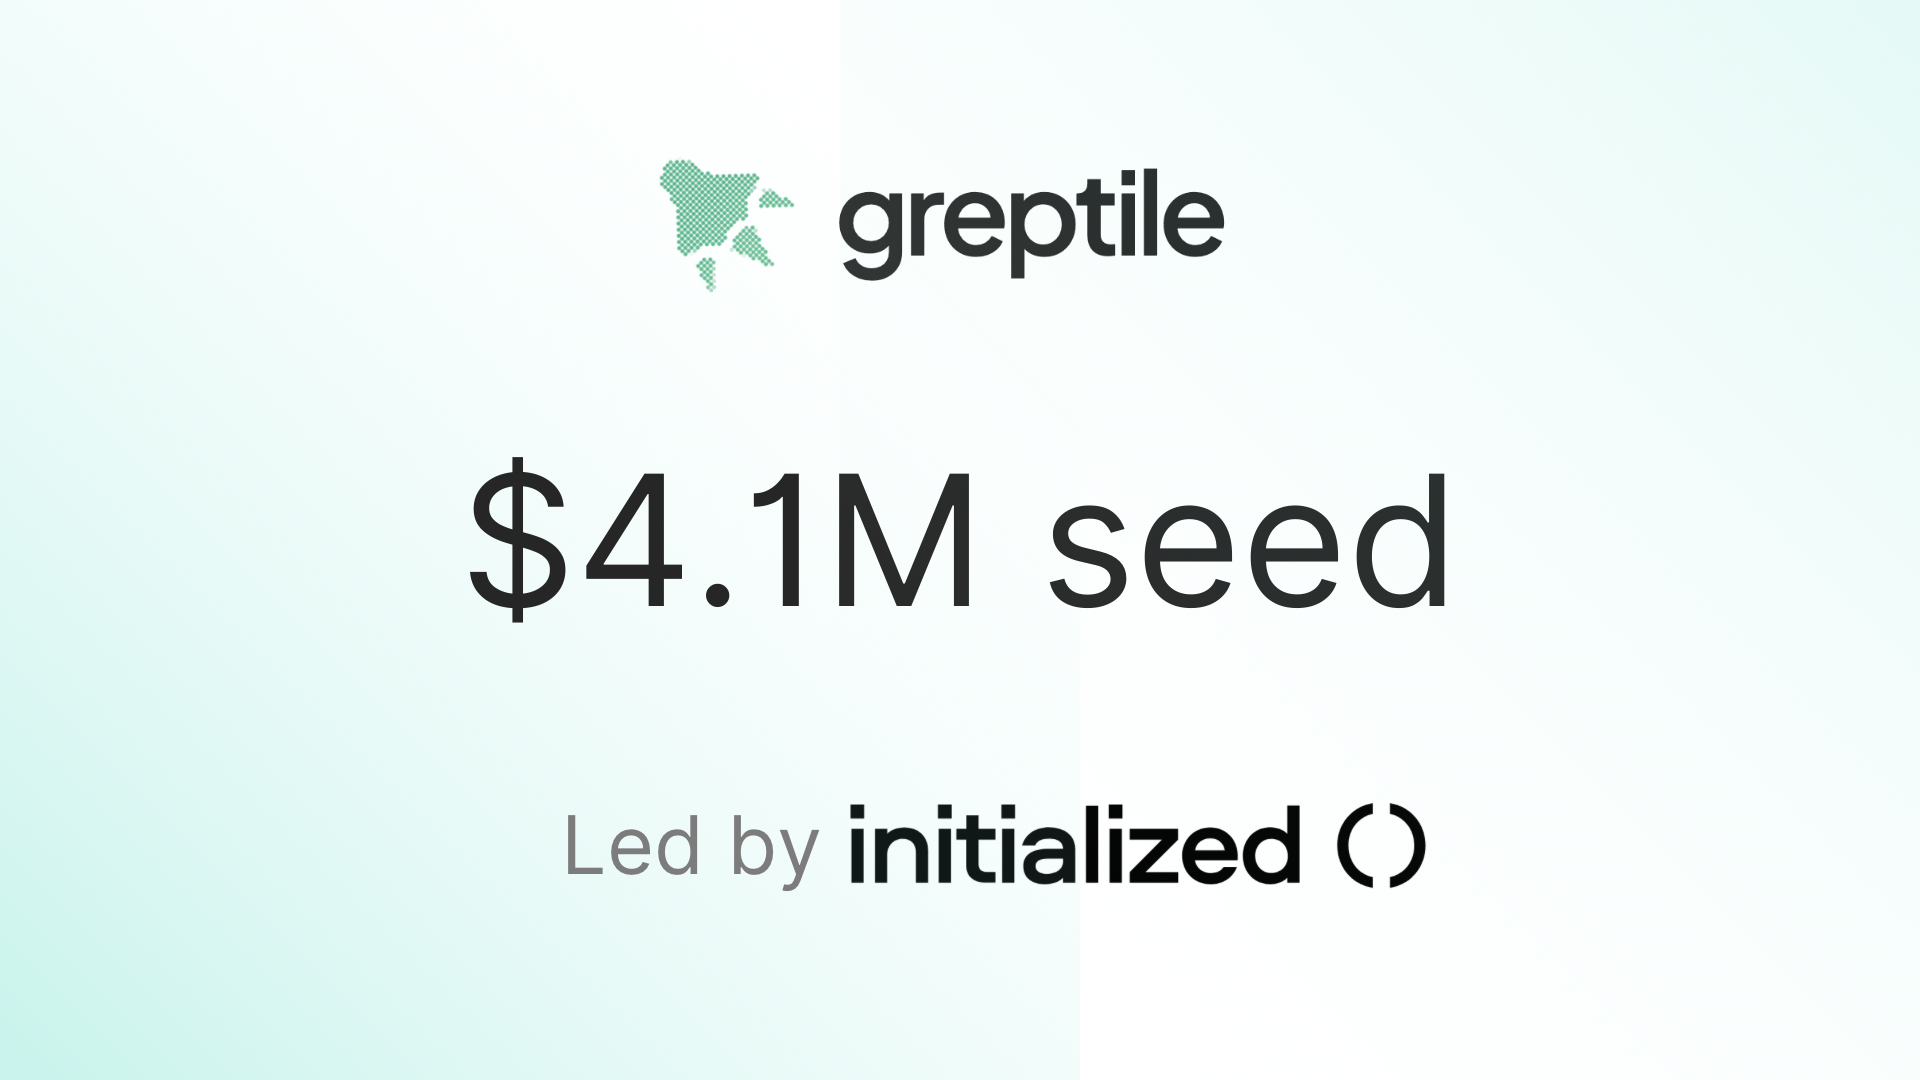 Announcing our $4.1M seed round